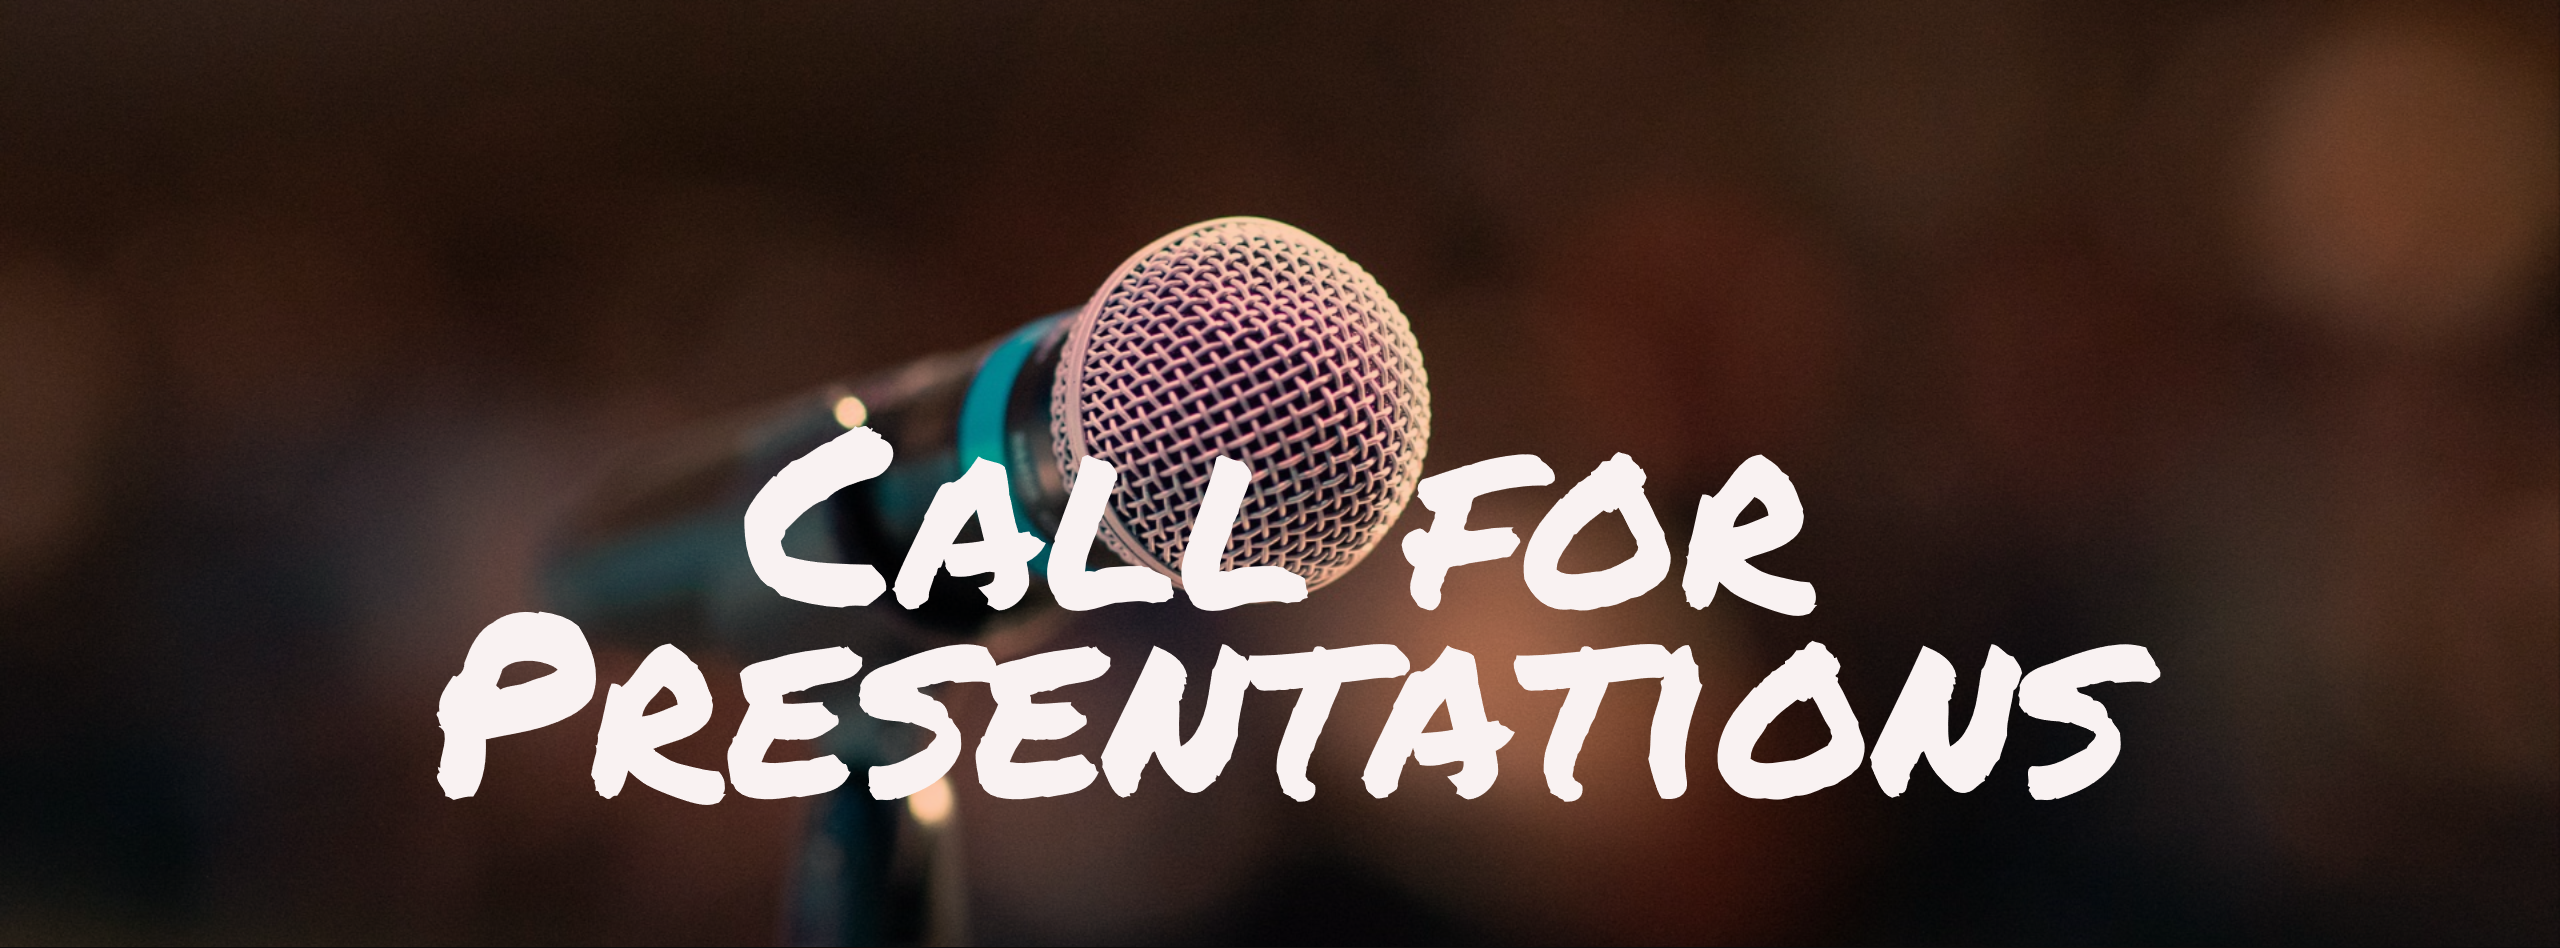 Call for Presentations